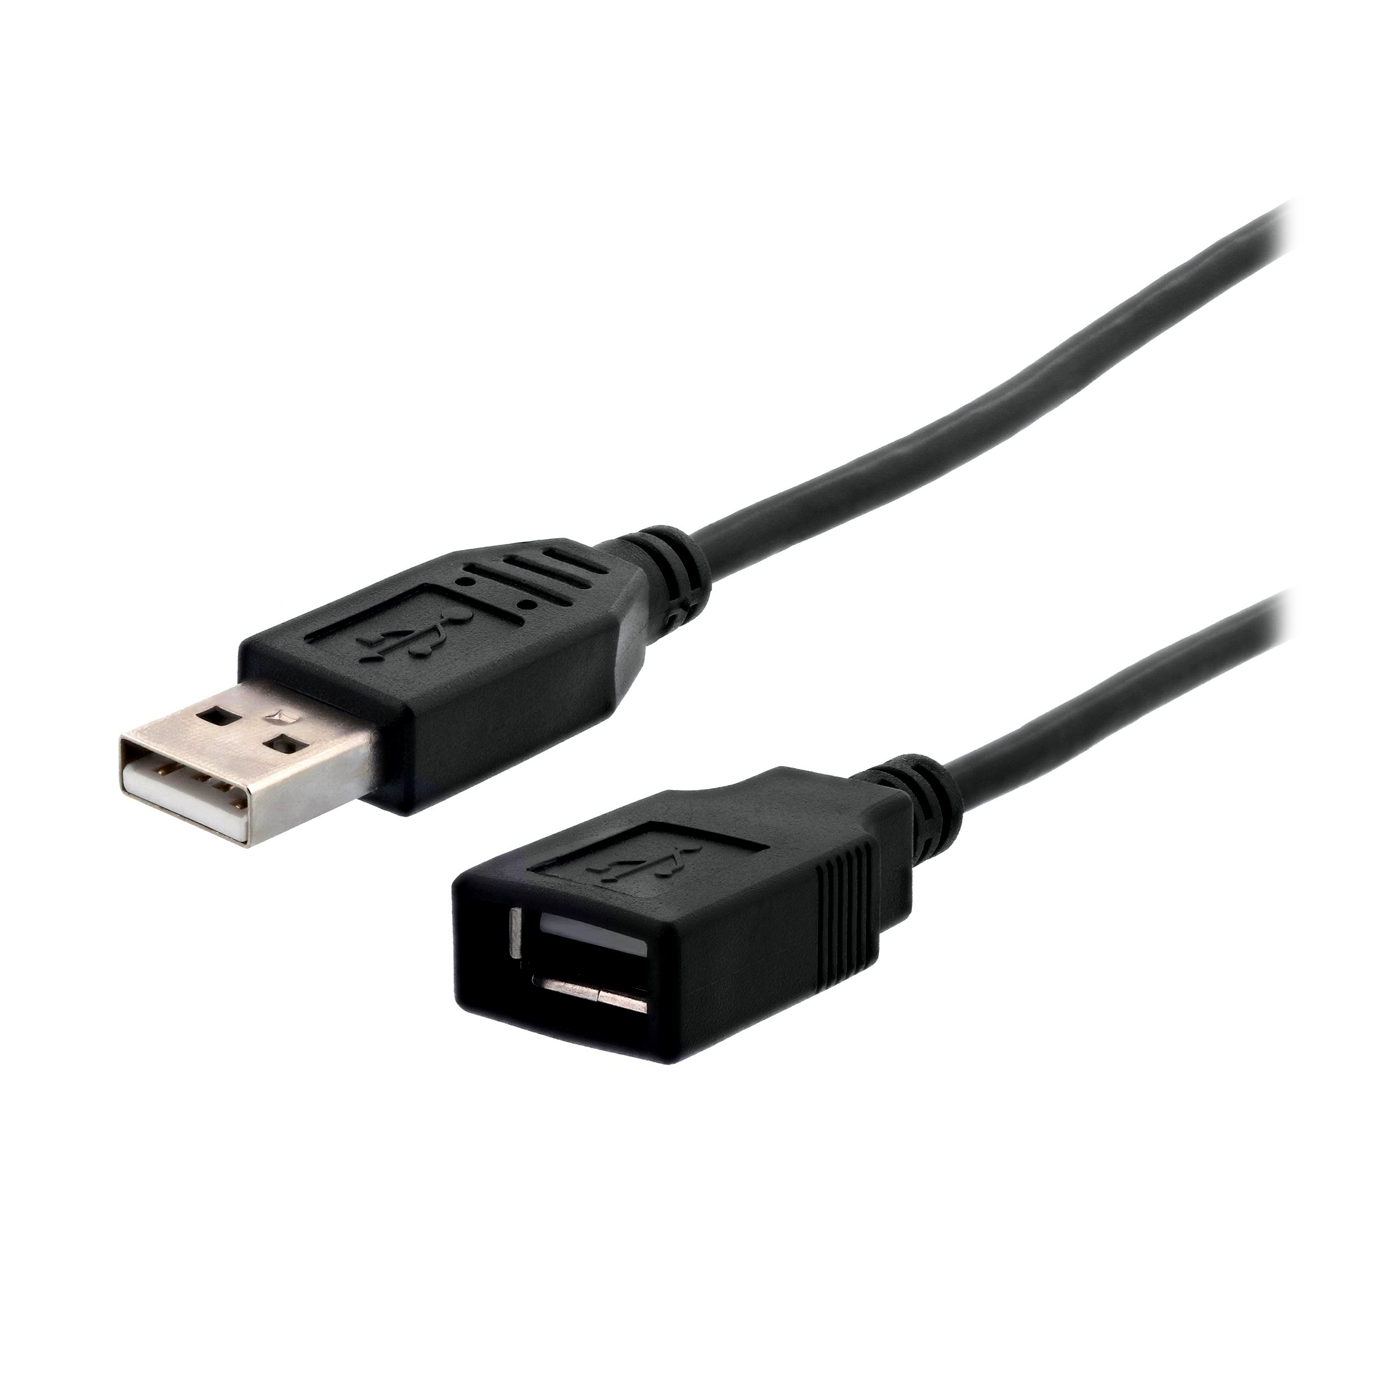 Fast USB 2.0 High Speed Cable Male to Female EXTENSION Lead A PLug to Socket UK 